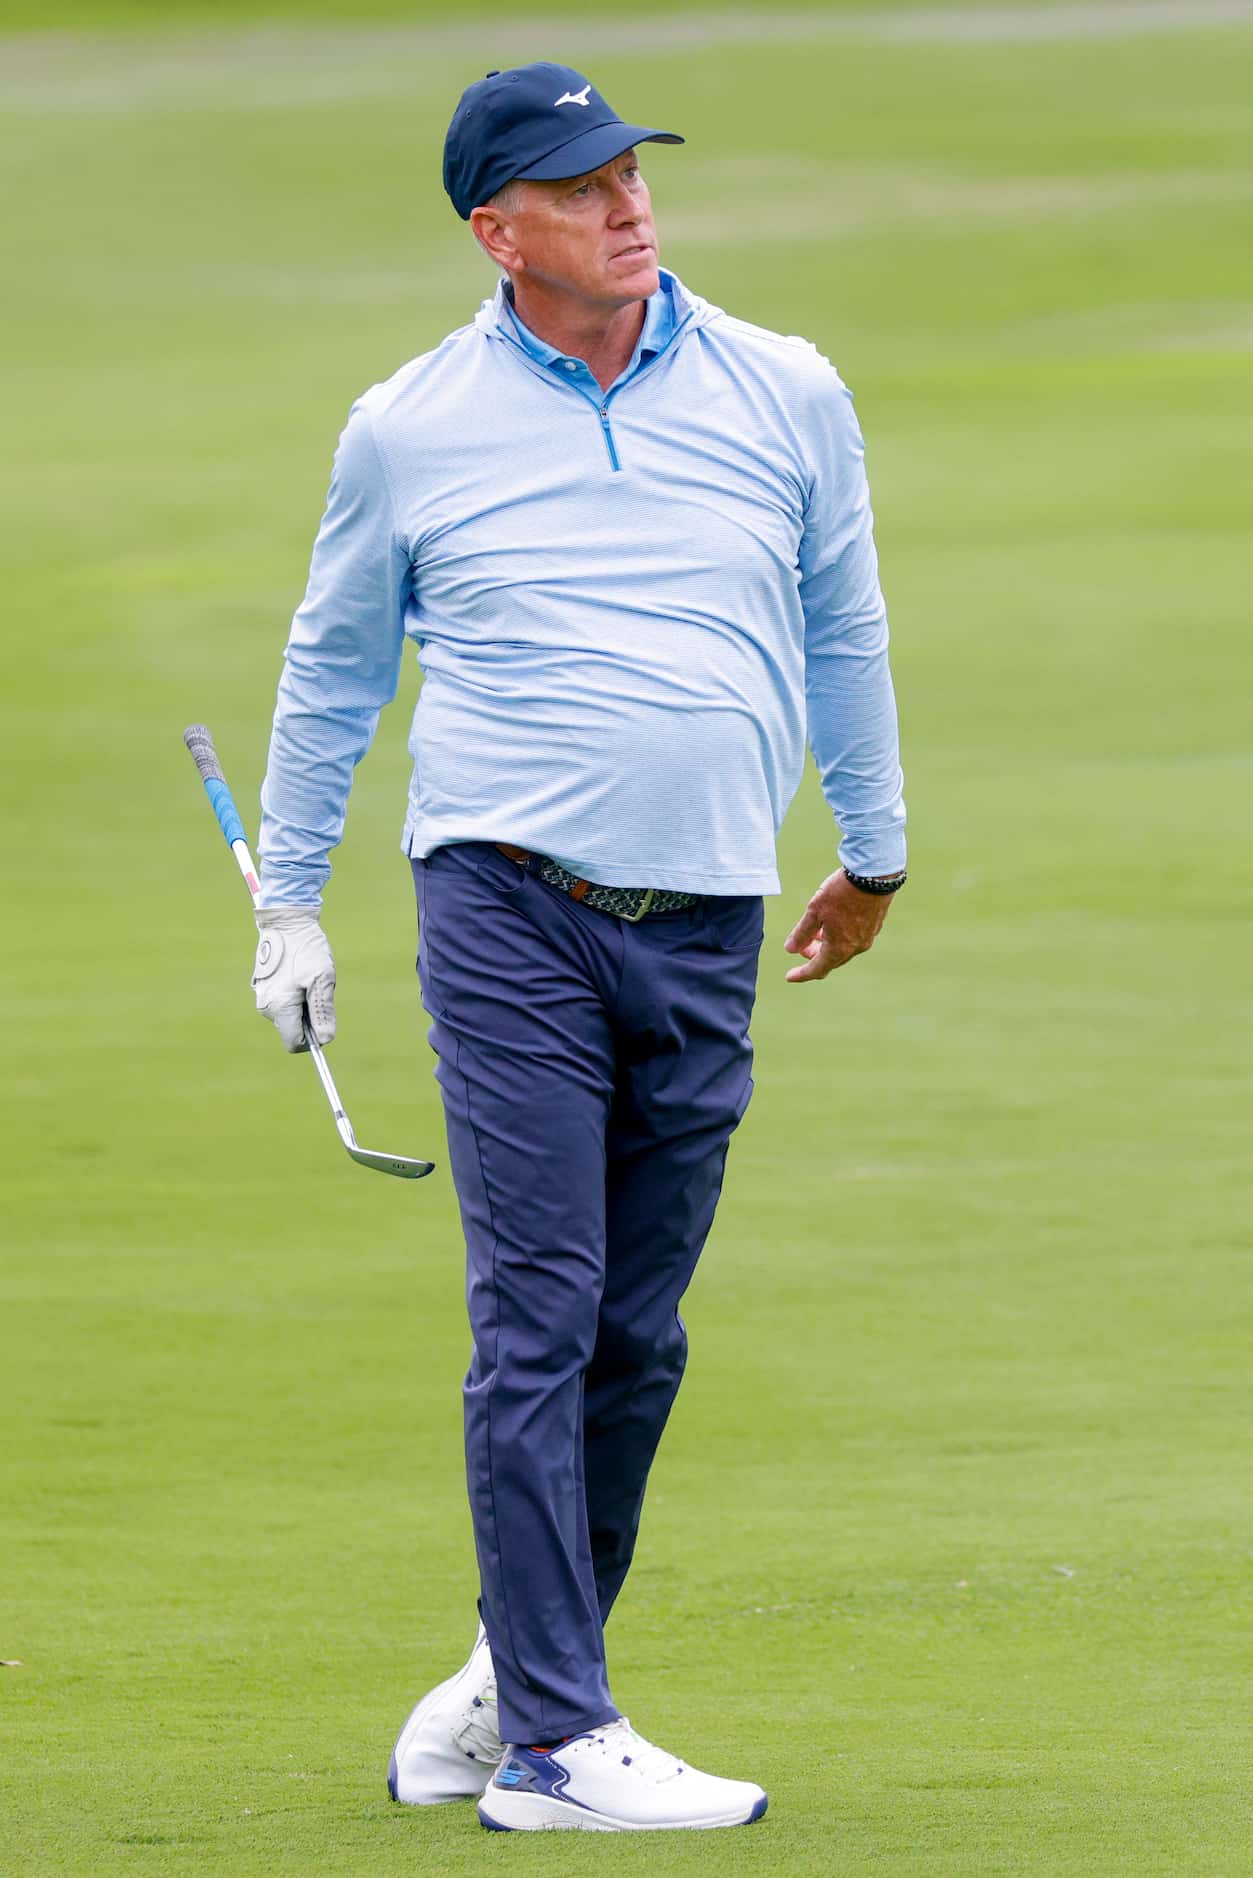 Former MLB pitcher Tom Glavine watches his shot on the 9th fairway during the first round of...